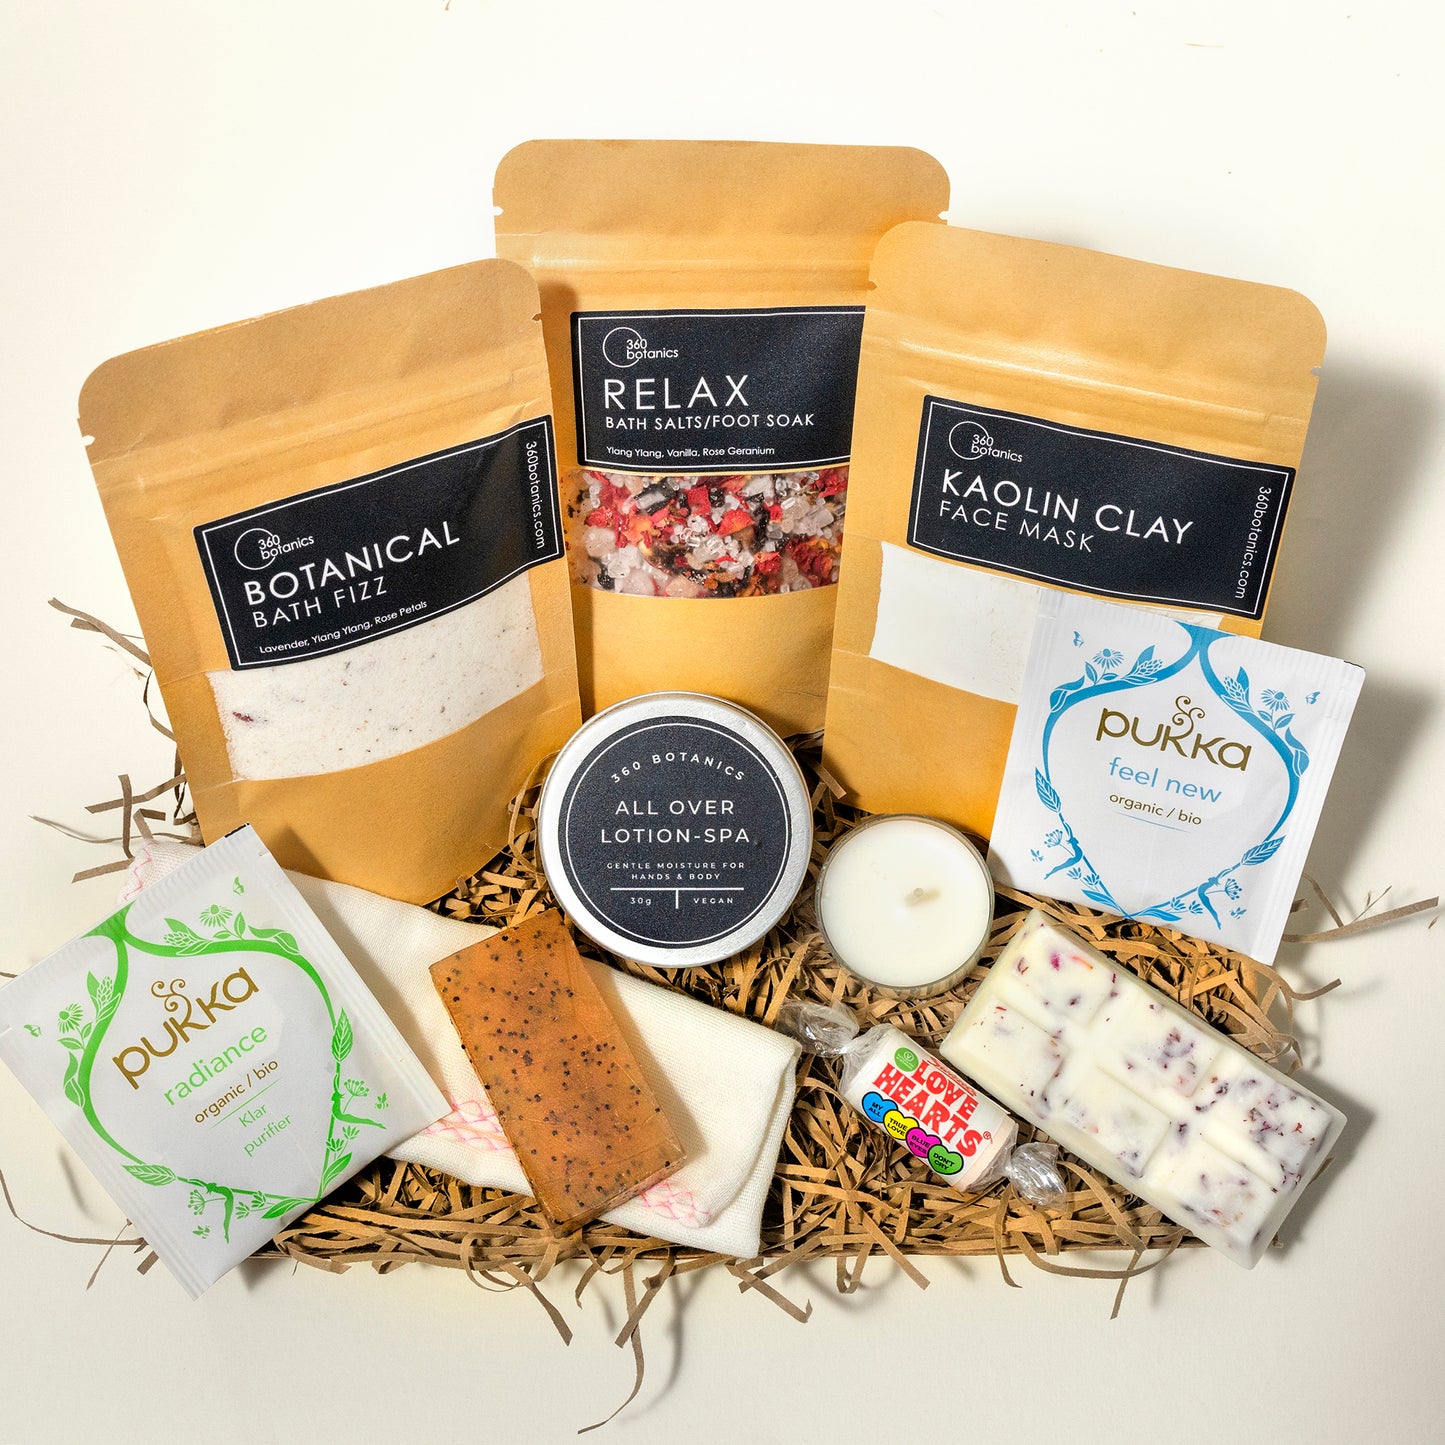 A variety of spa products arranged in a gift basket, including 360 Botanics Botanical Bath Fizz, Relax Bath Salts/Foot Soak, Kaolin Clay Face Mask, an All Over Lotion-SPA, a Pukka 'radiance' organic tea packet, a Pukka 'feel new' organic tea packet, a soap bar, and a candle, all nestled in natural wood straw.